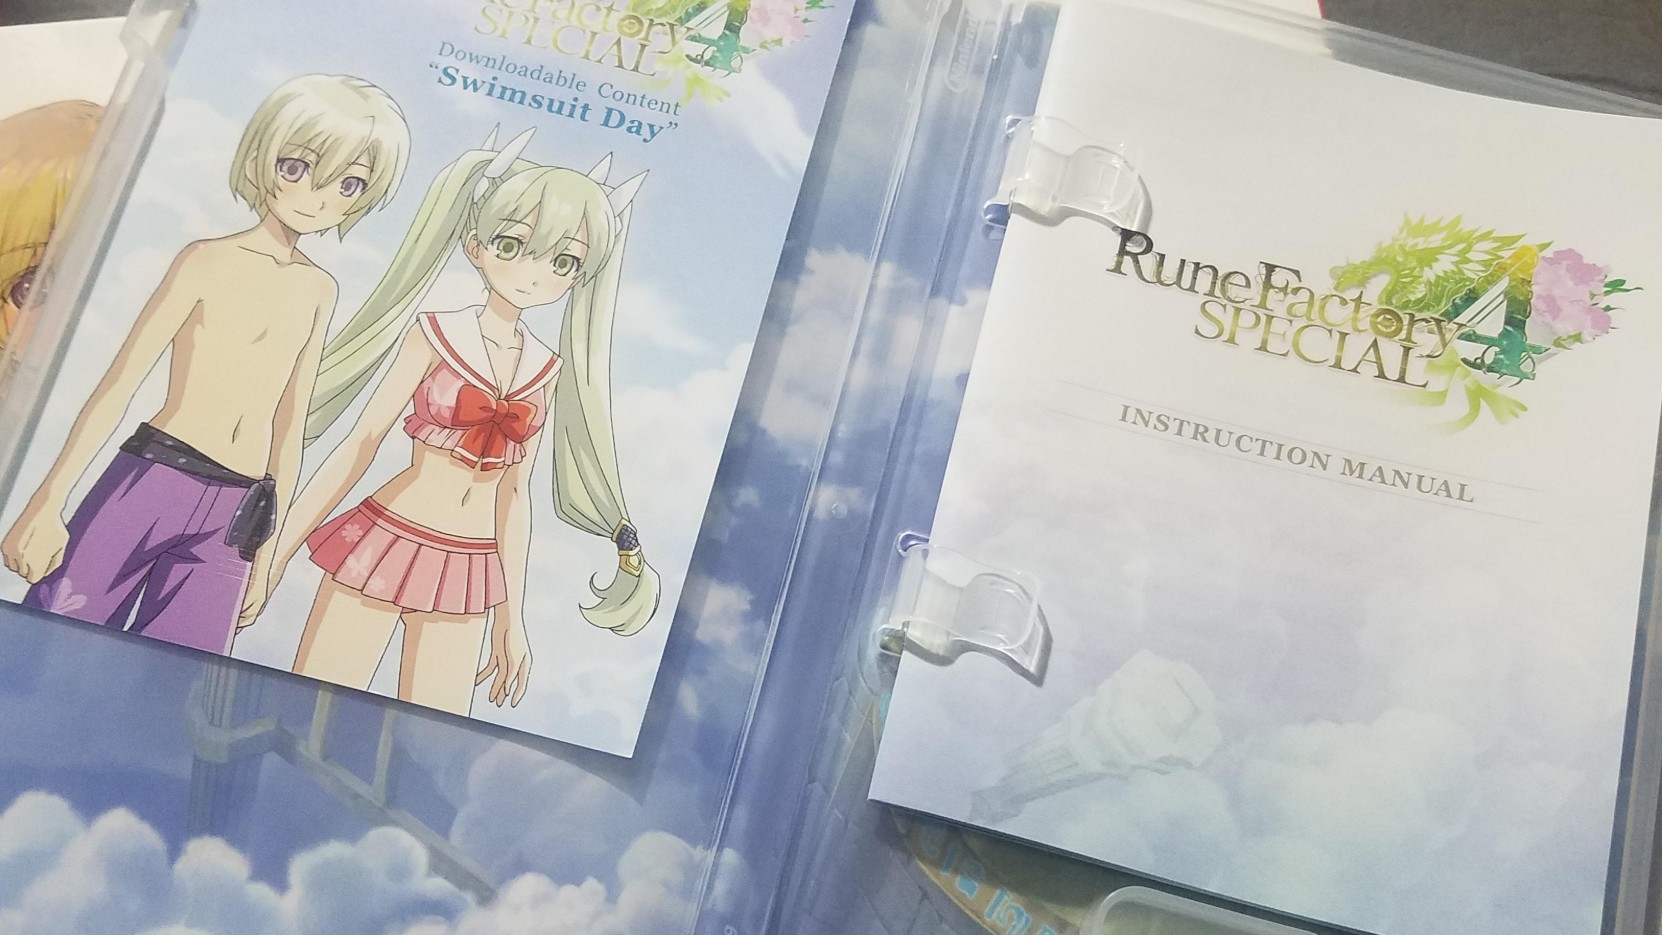 rune factory 4 special us release date